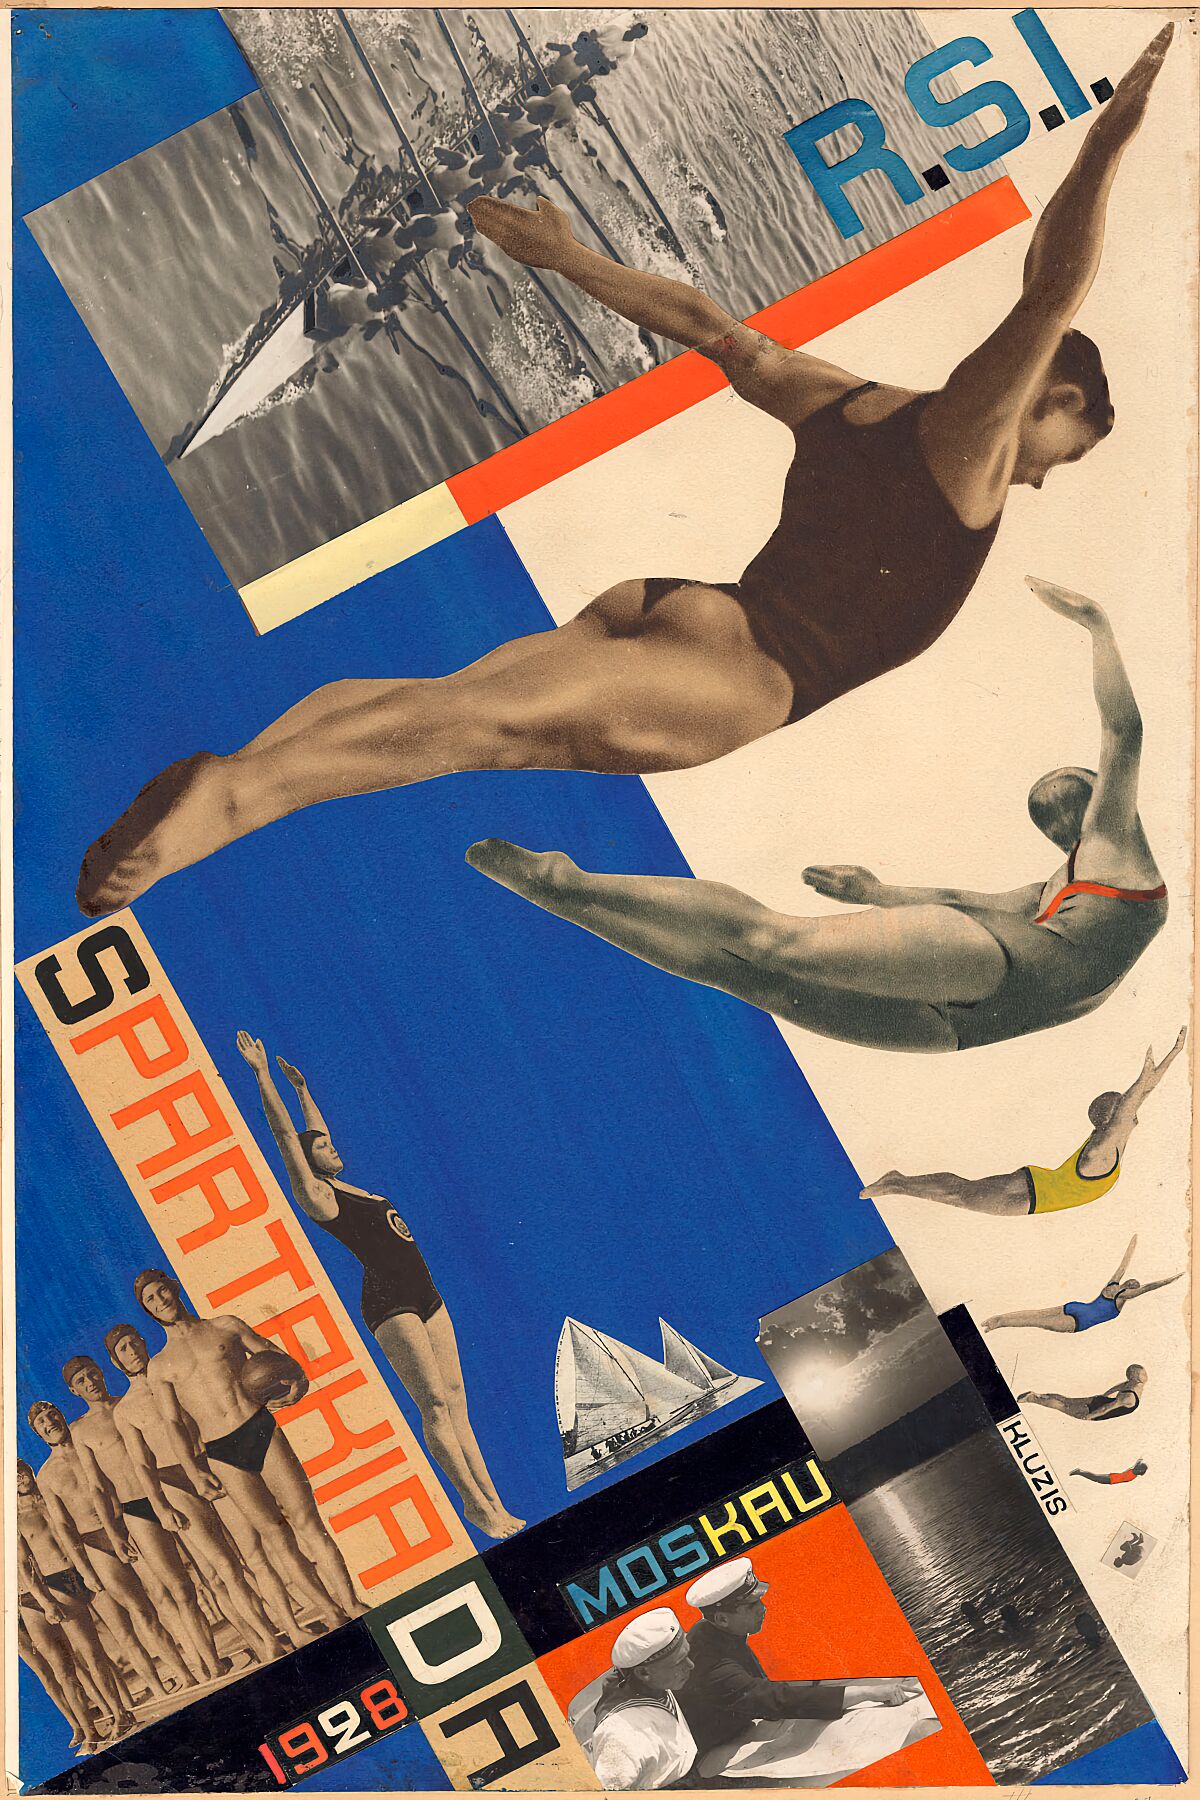 In 1928, just a decade after Russian Revolution, the Soviet government launched the Spartakiada, a kind of proletarian Olympics as a counterweight to the official 1928 Olympics in Amsterdam.